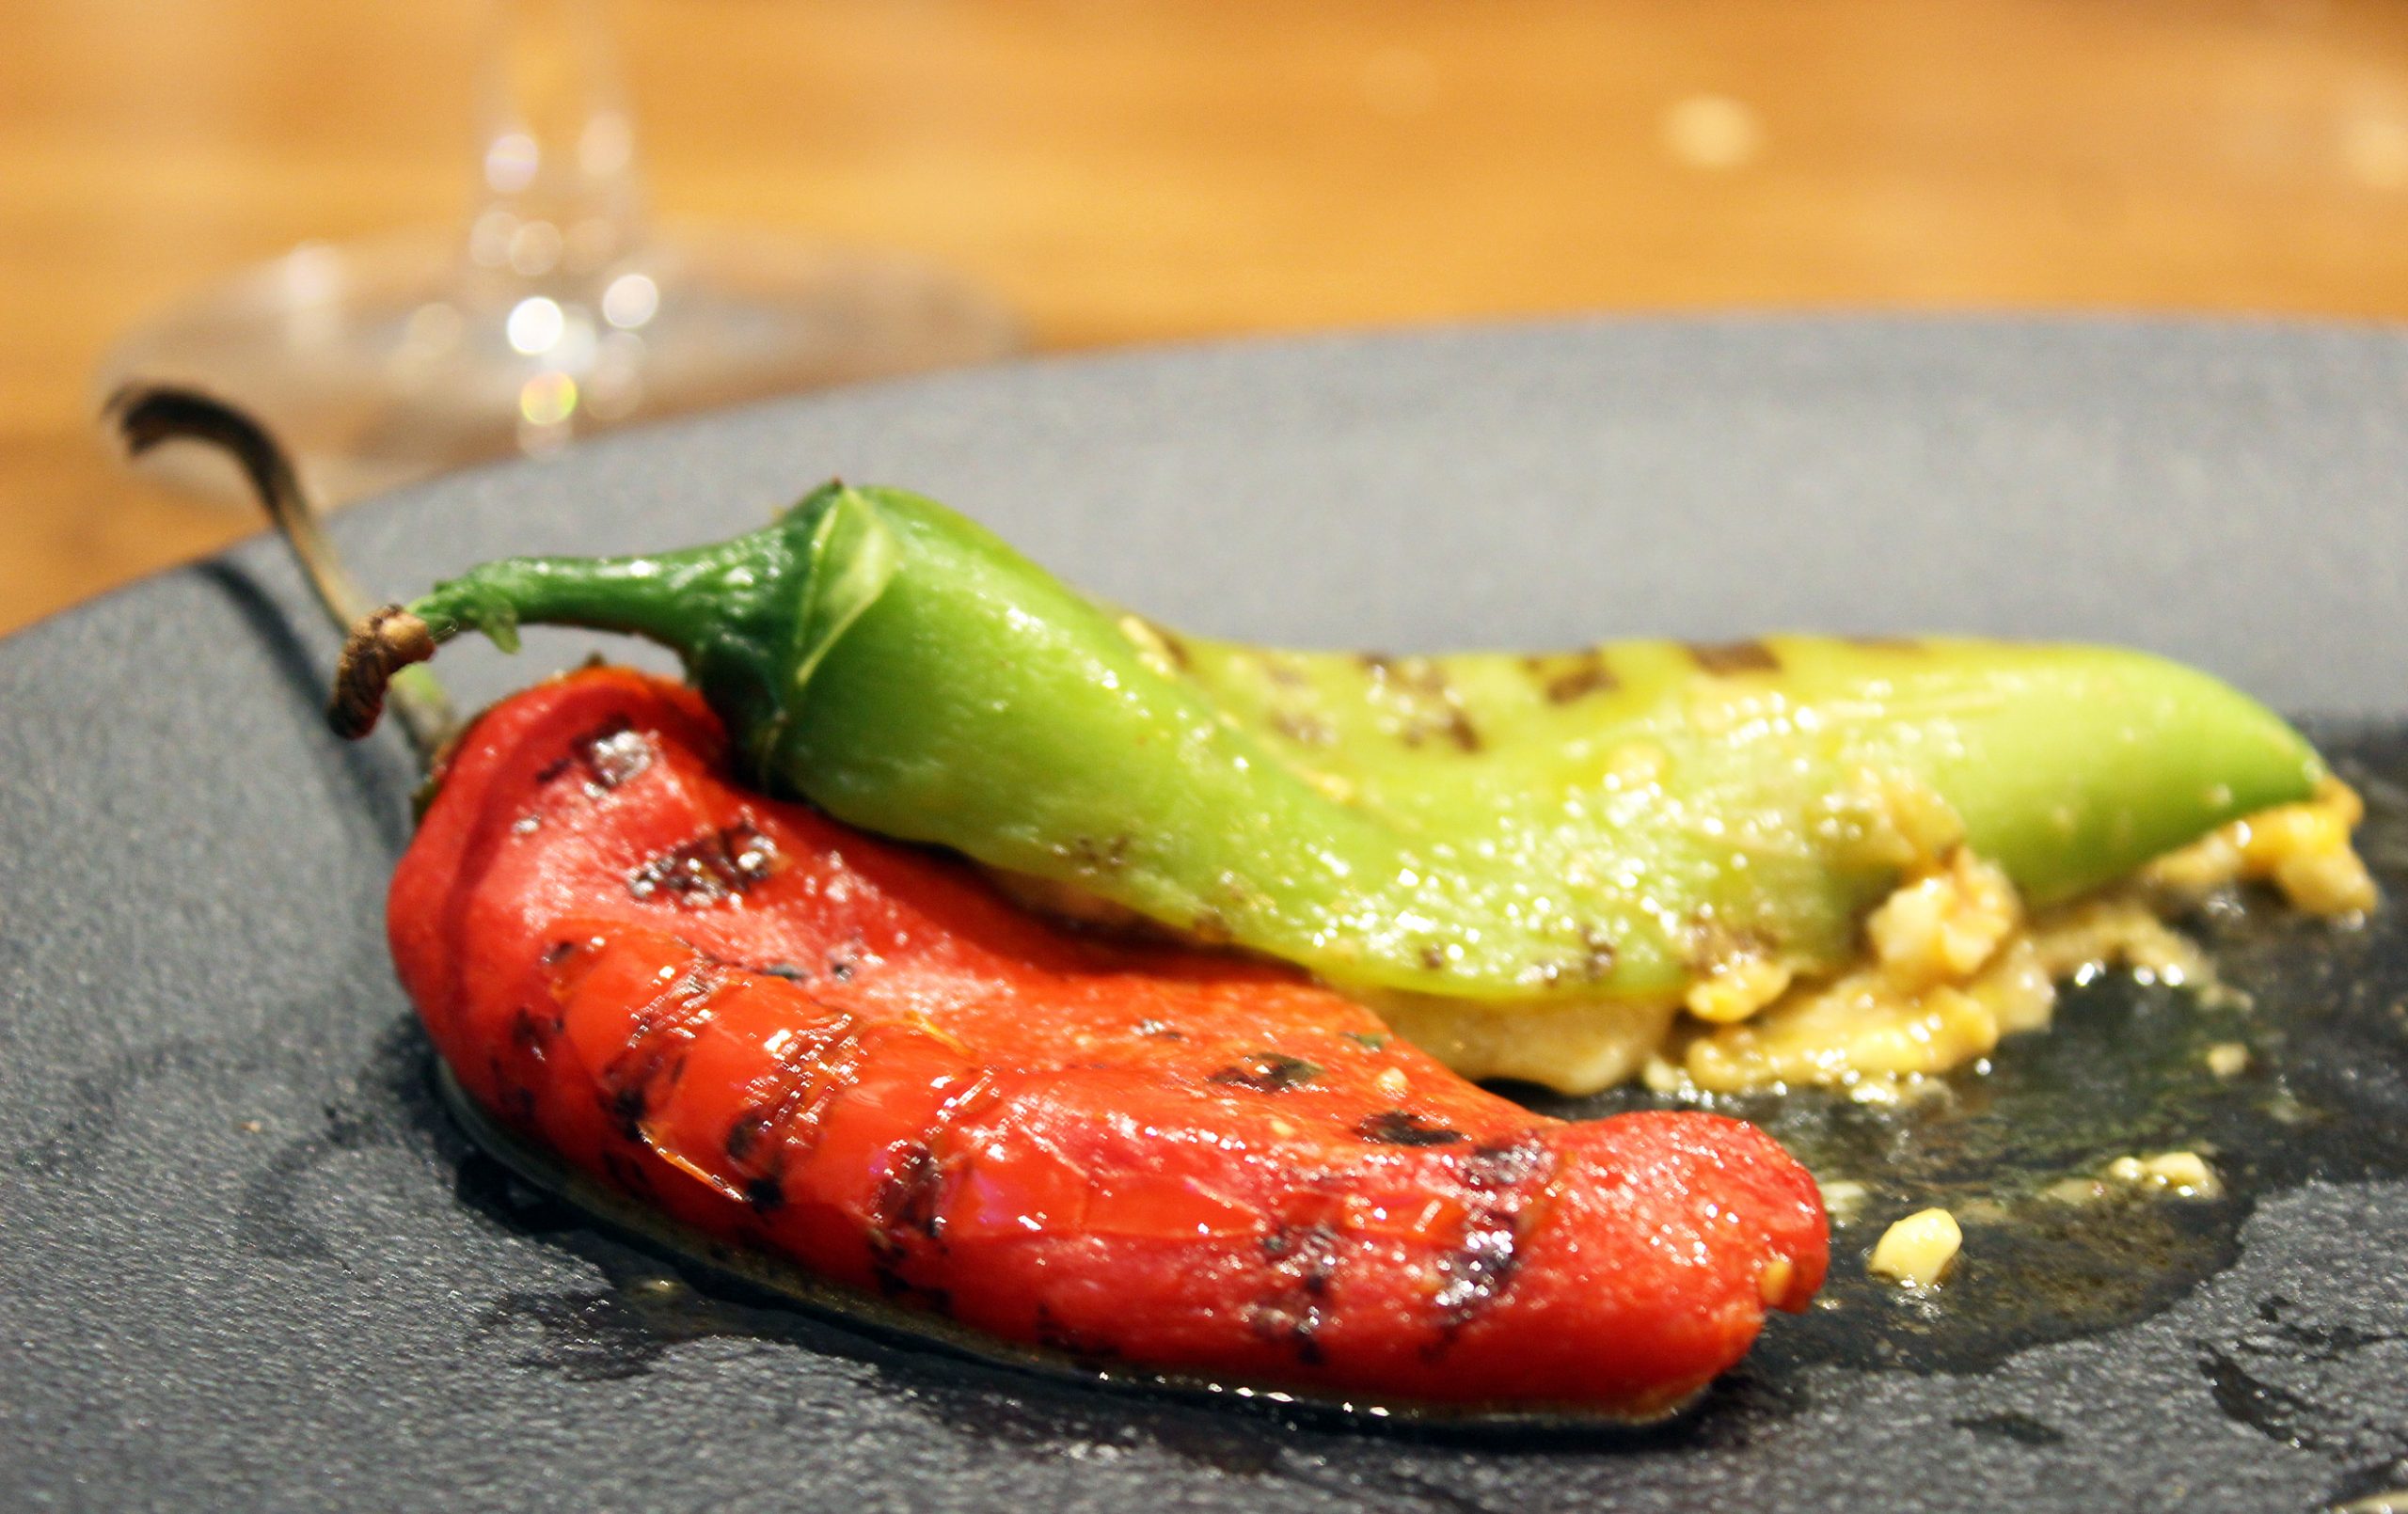 Chillies and Pepper